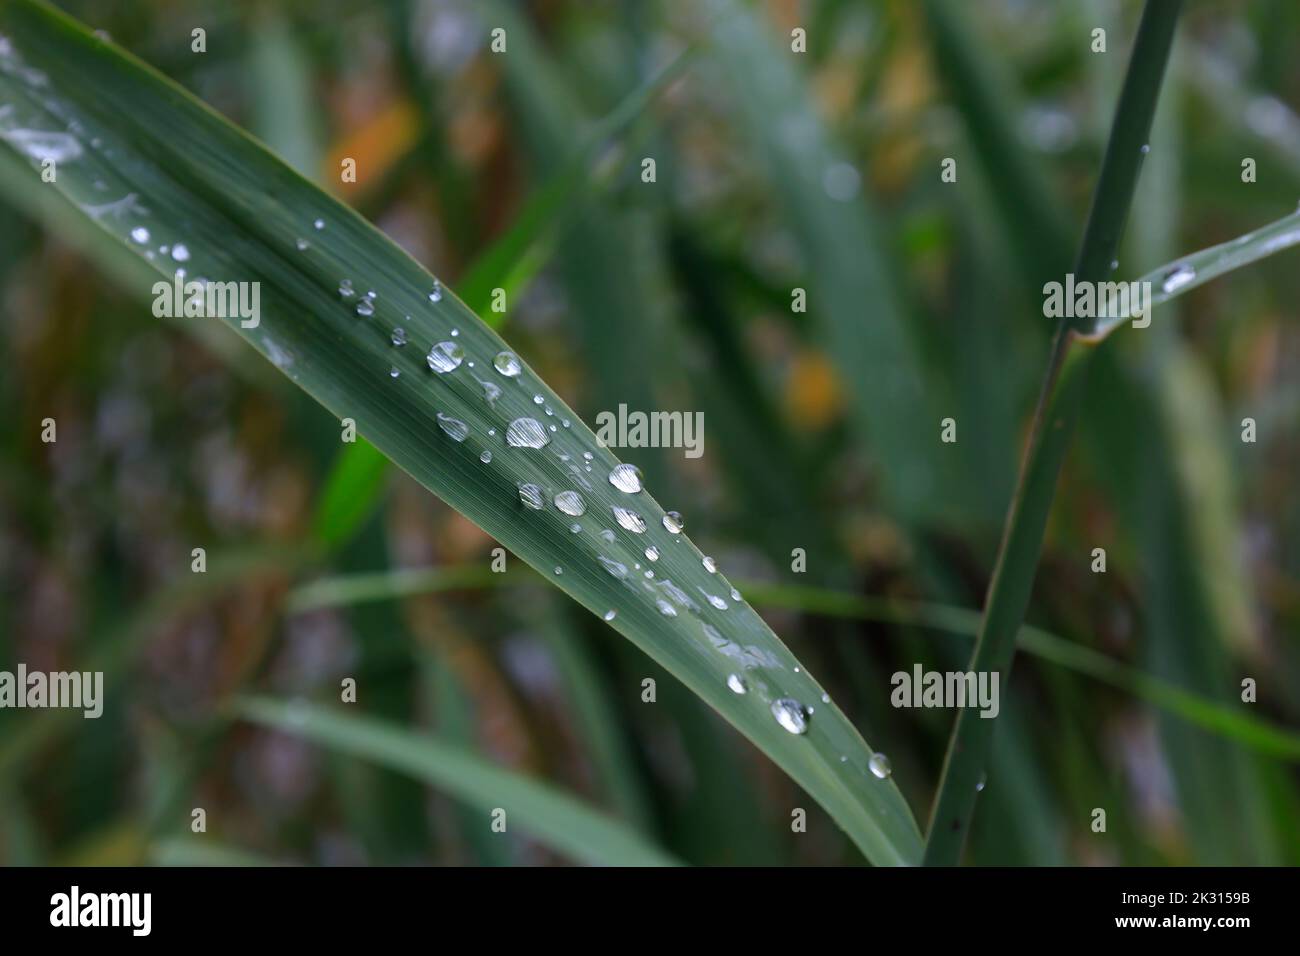 Green leaf covered in raindrops Stock Photo